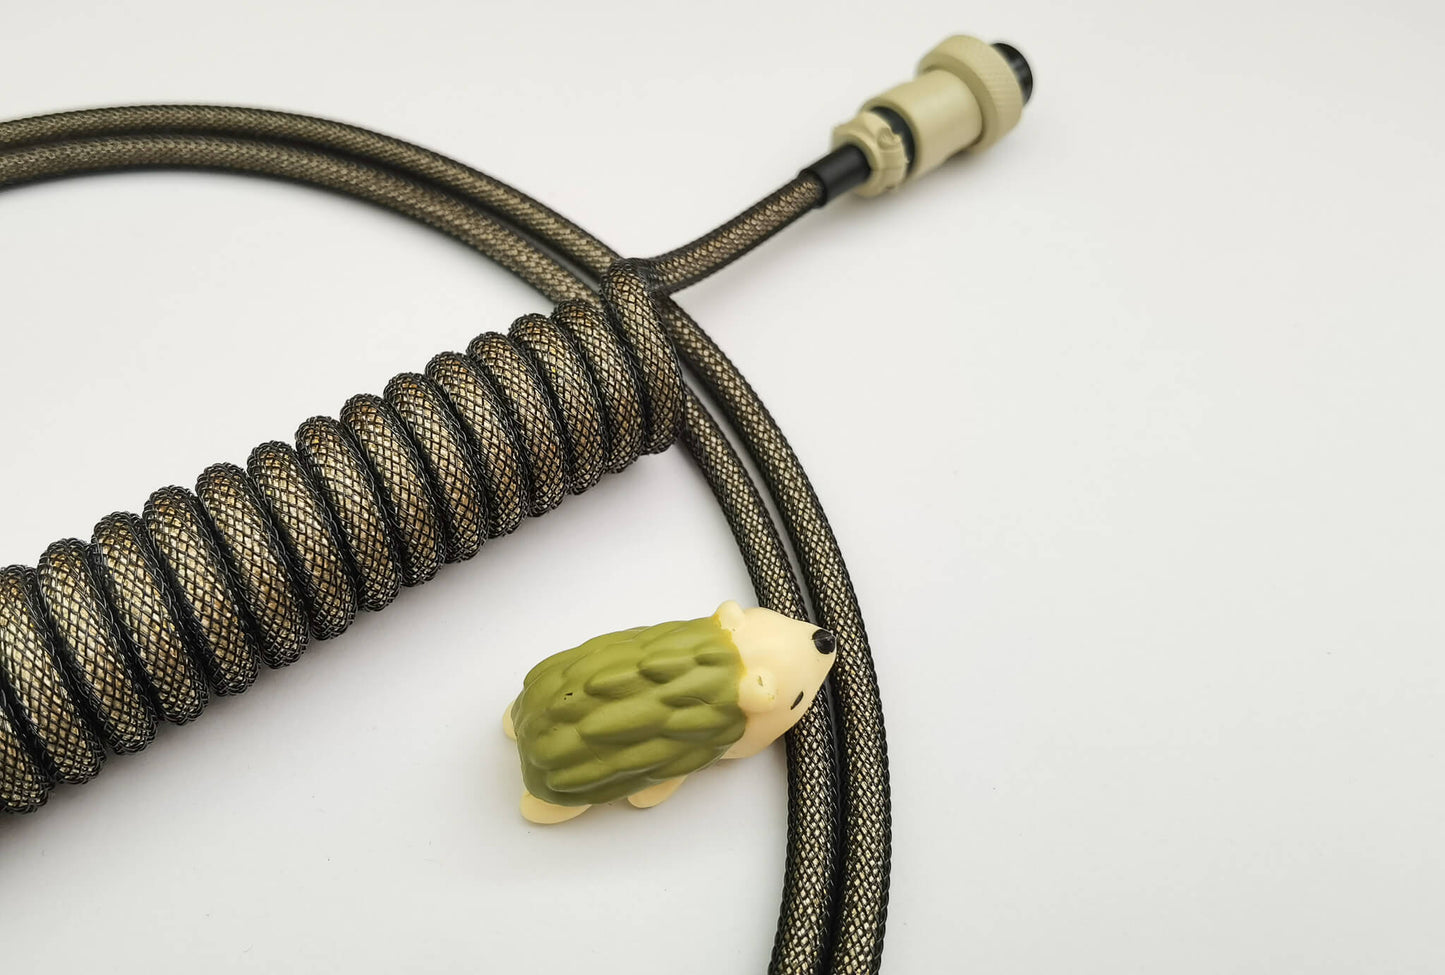 Coiled cable for GMK Nines keycaps